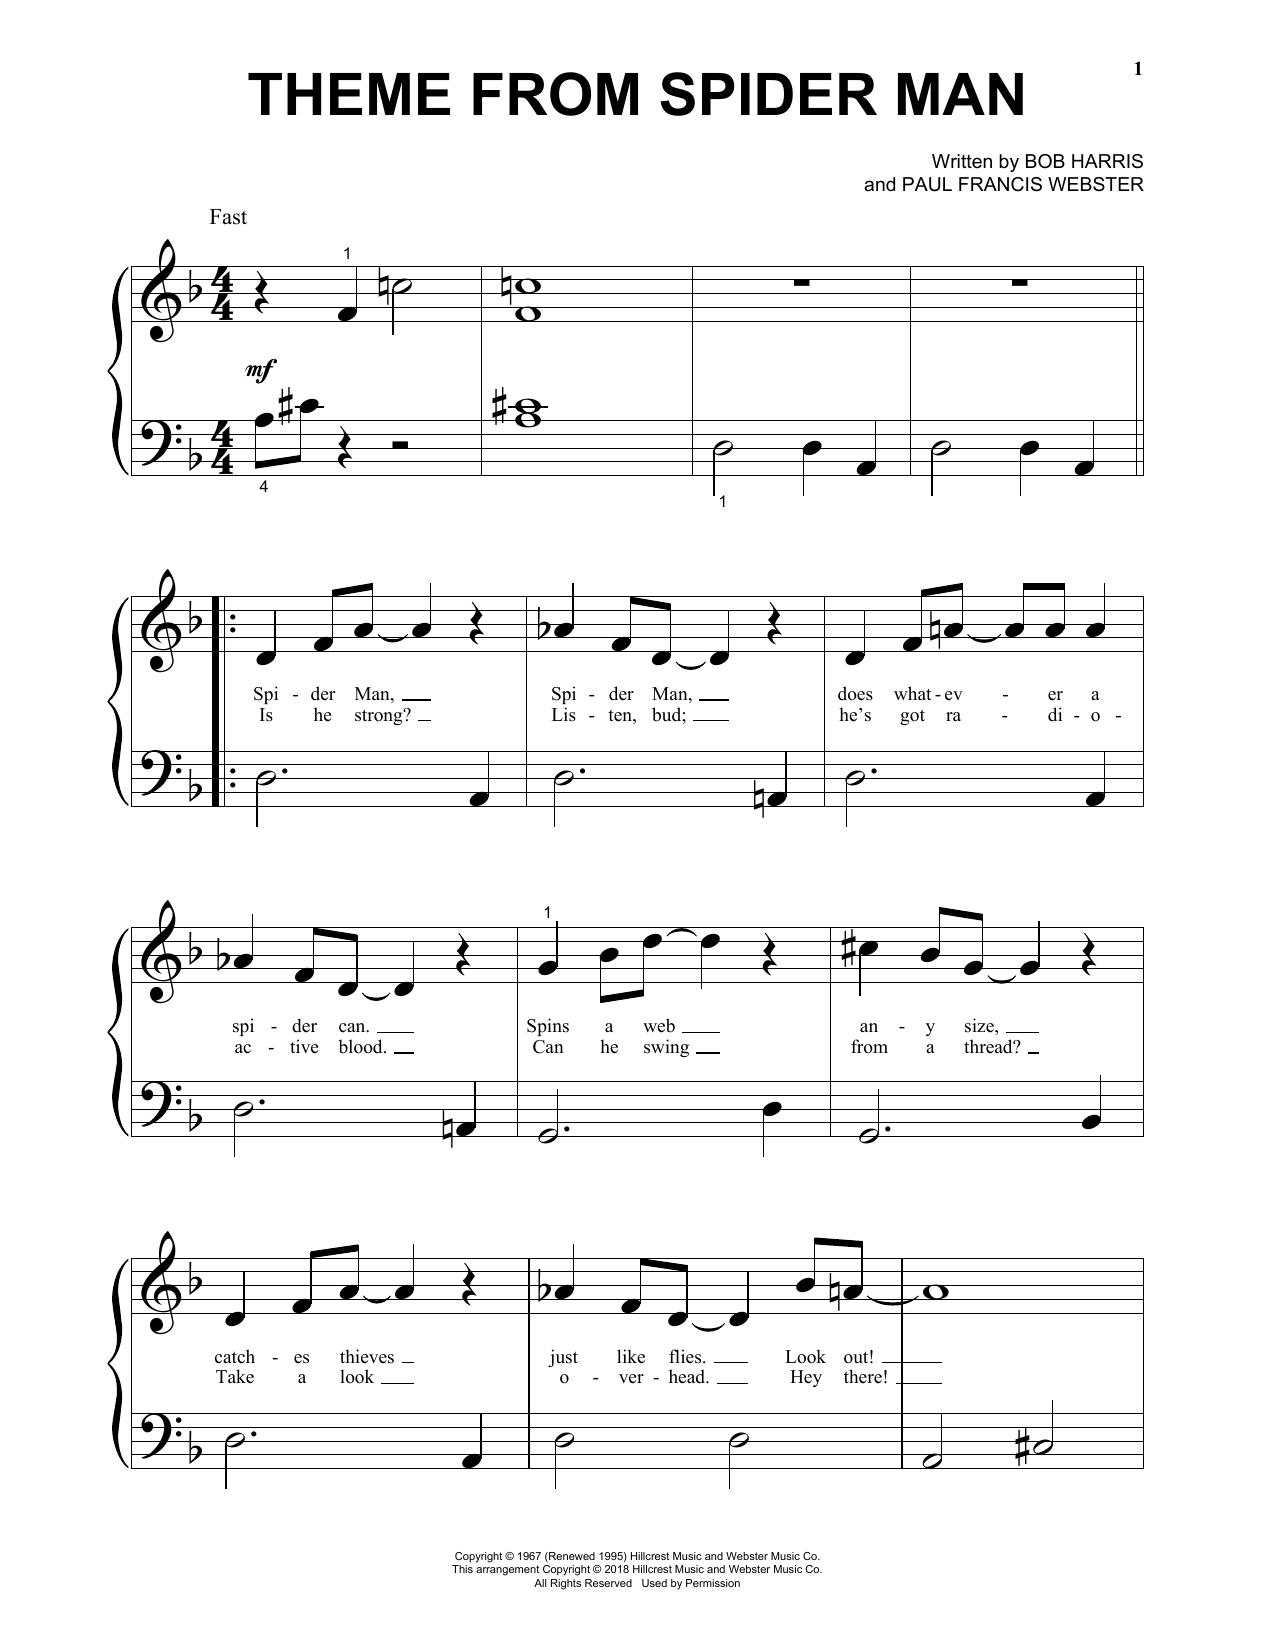 Paul Francis Webster Theme From Spider Man Chords Sheet Music